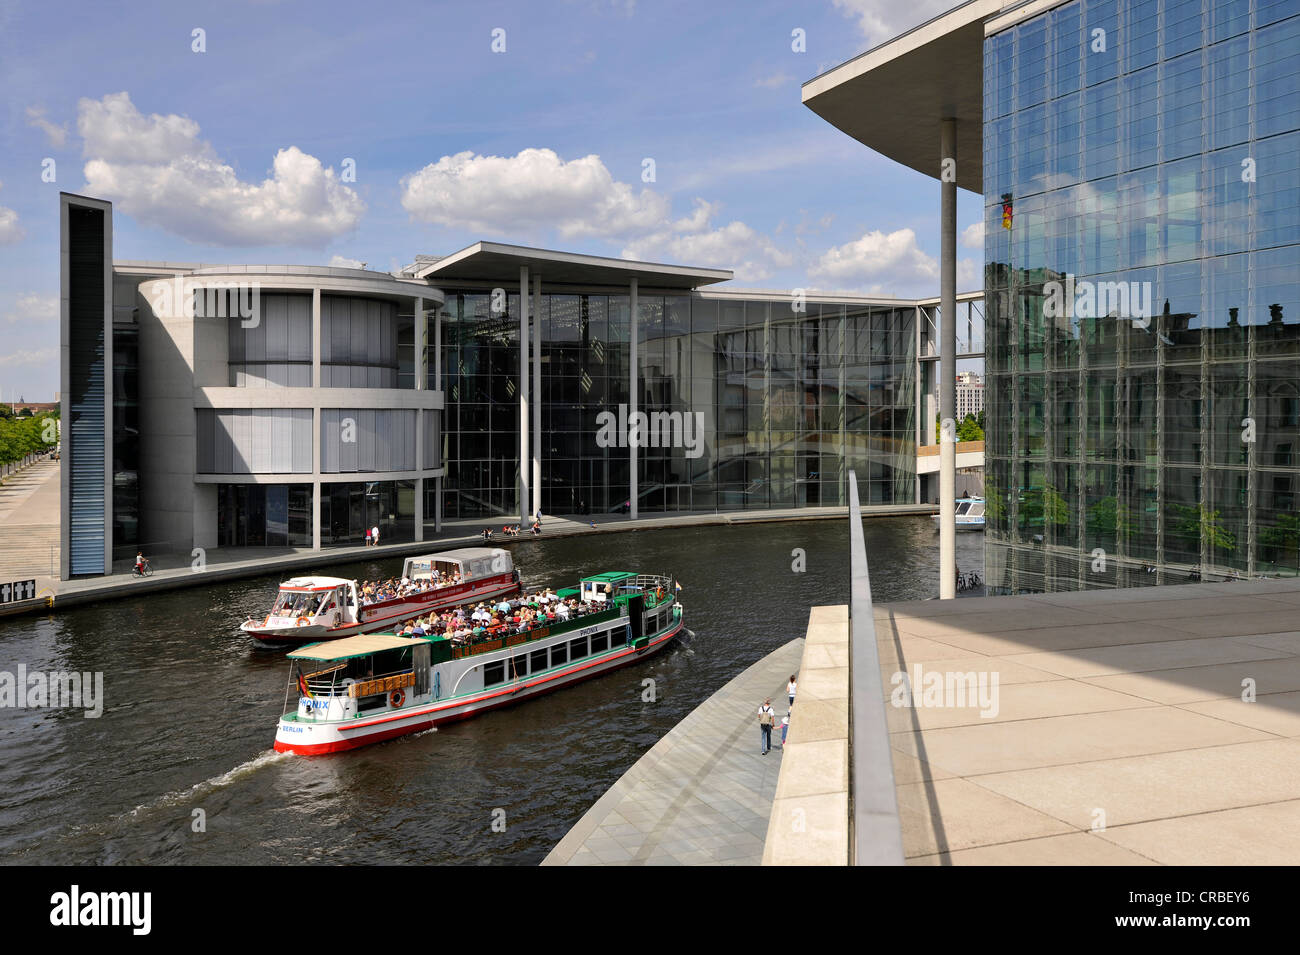 Busy shipping traffic, excusion boats in front of Marie-Elisabeth-Lueders-House and Paul-Loebe-Haus, German parliament buildings Stock Photo